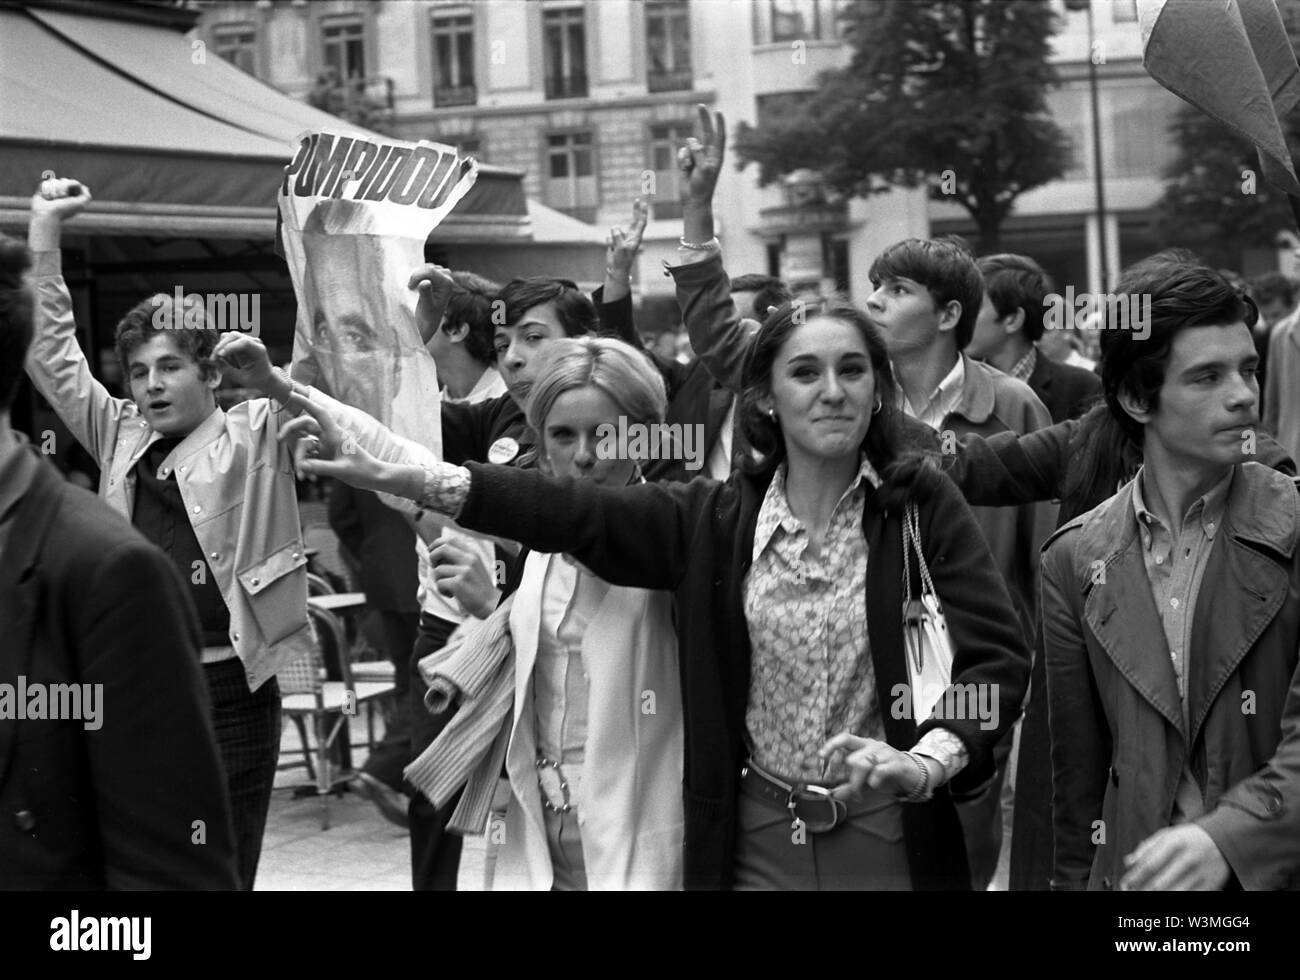 AJAXNETPHOTO. JULY, 1969. PARIS, FRANCE. - STUDENT STREET DEMO - PHARMACEUTICAL UNIVERSITY FACULTY STUDENTS PROTEST ON THE CITY STREETS AGAINST NEW REGULATIONS BARRING THEM FROM HOSPITAL PRACTICE.PHOTO:JONATHAN EASTLAND/AJAX REF:692206031 Stock Photo